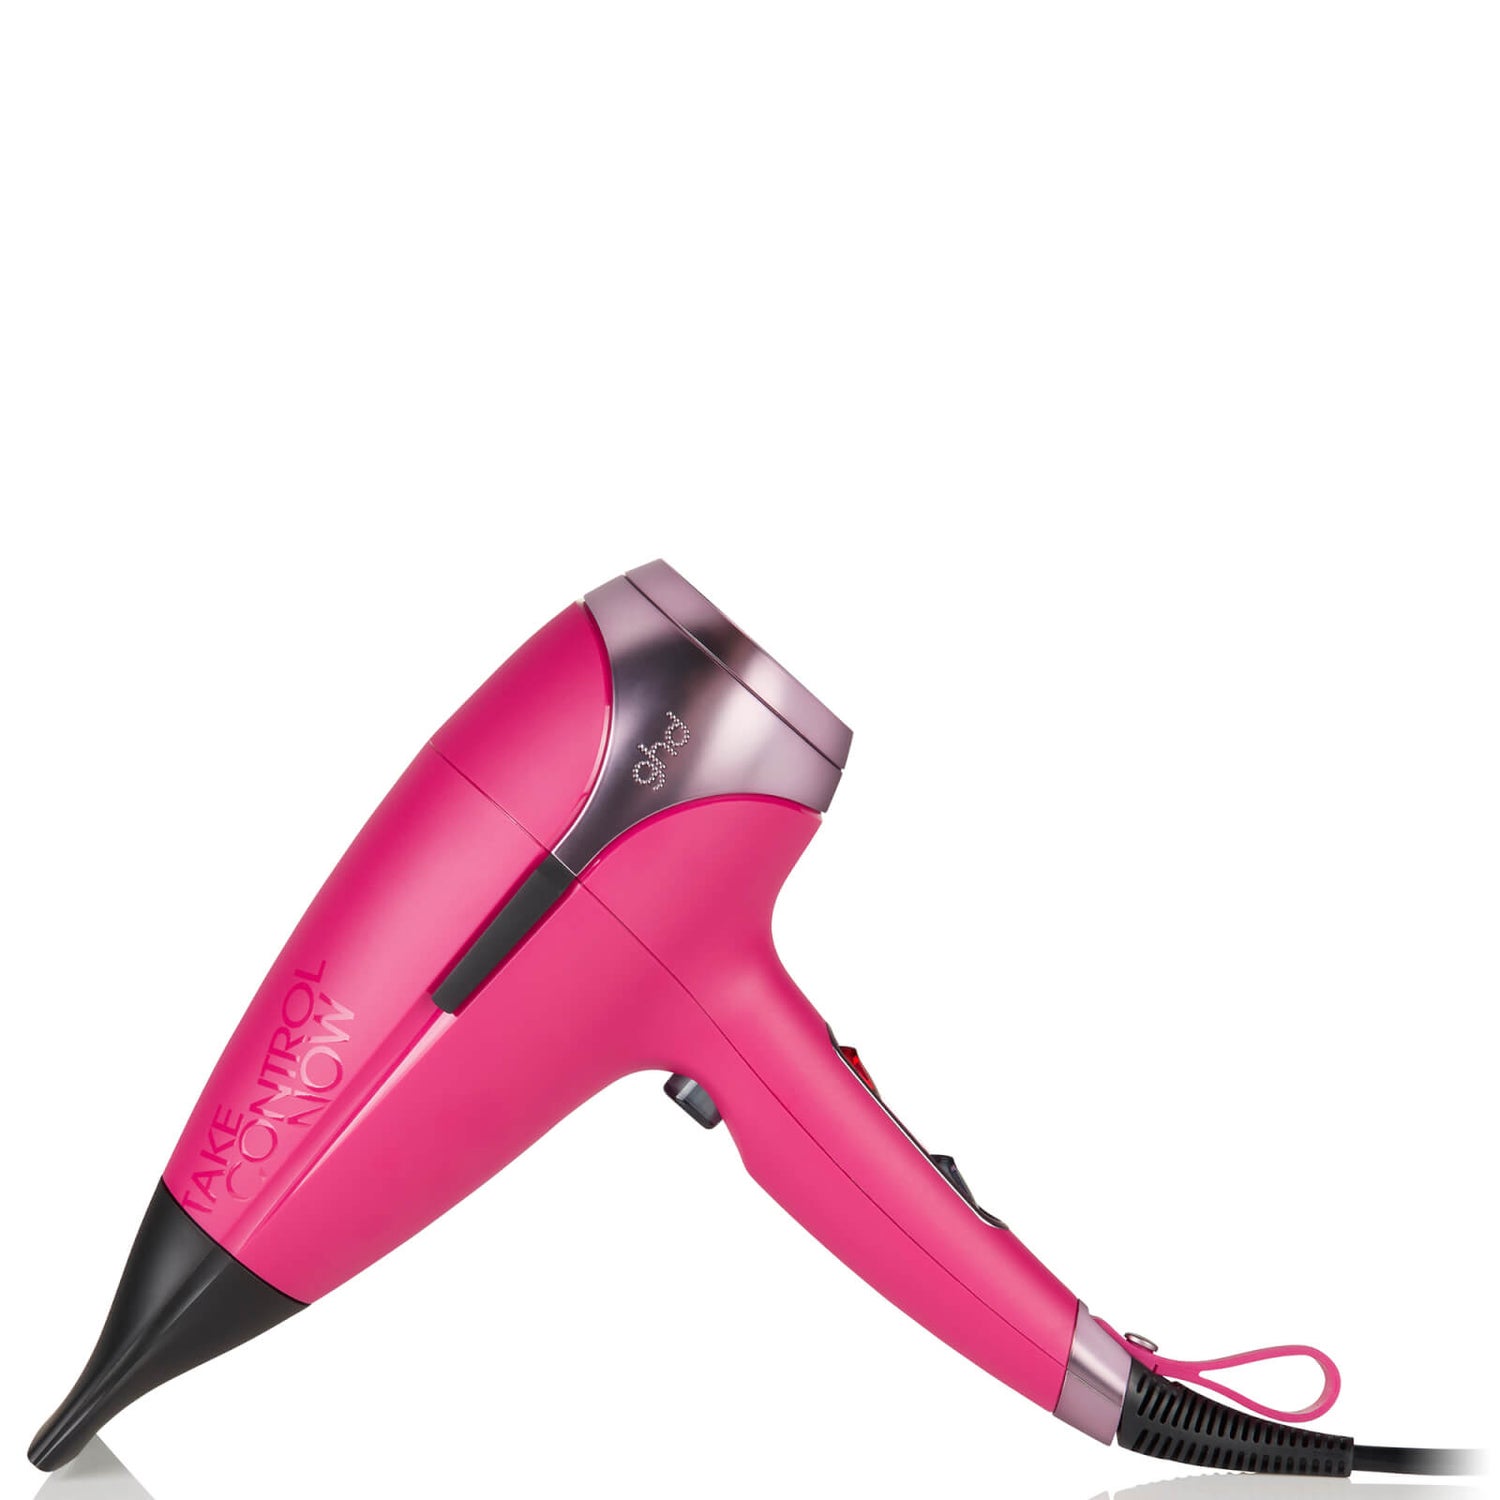 ghd Helios Hair Dryer in Orchid Pink